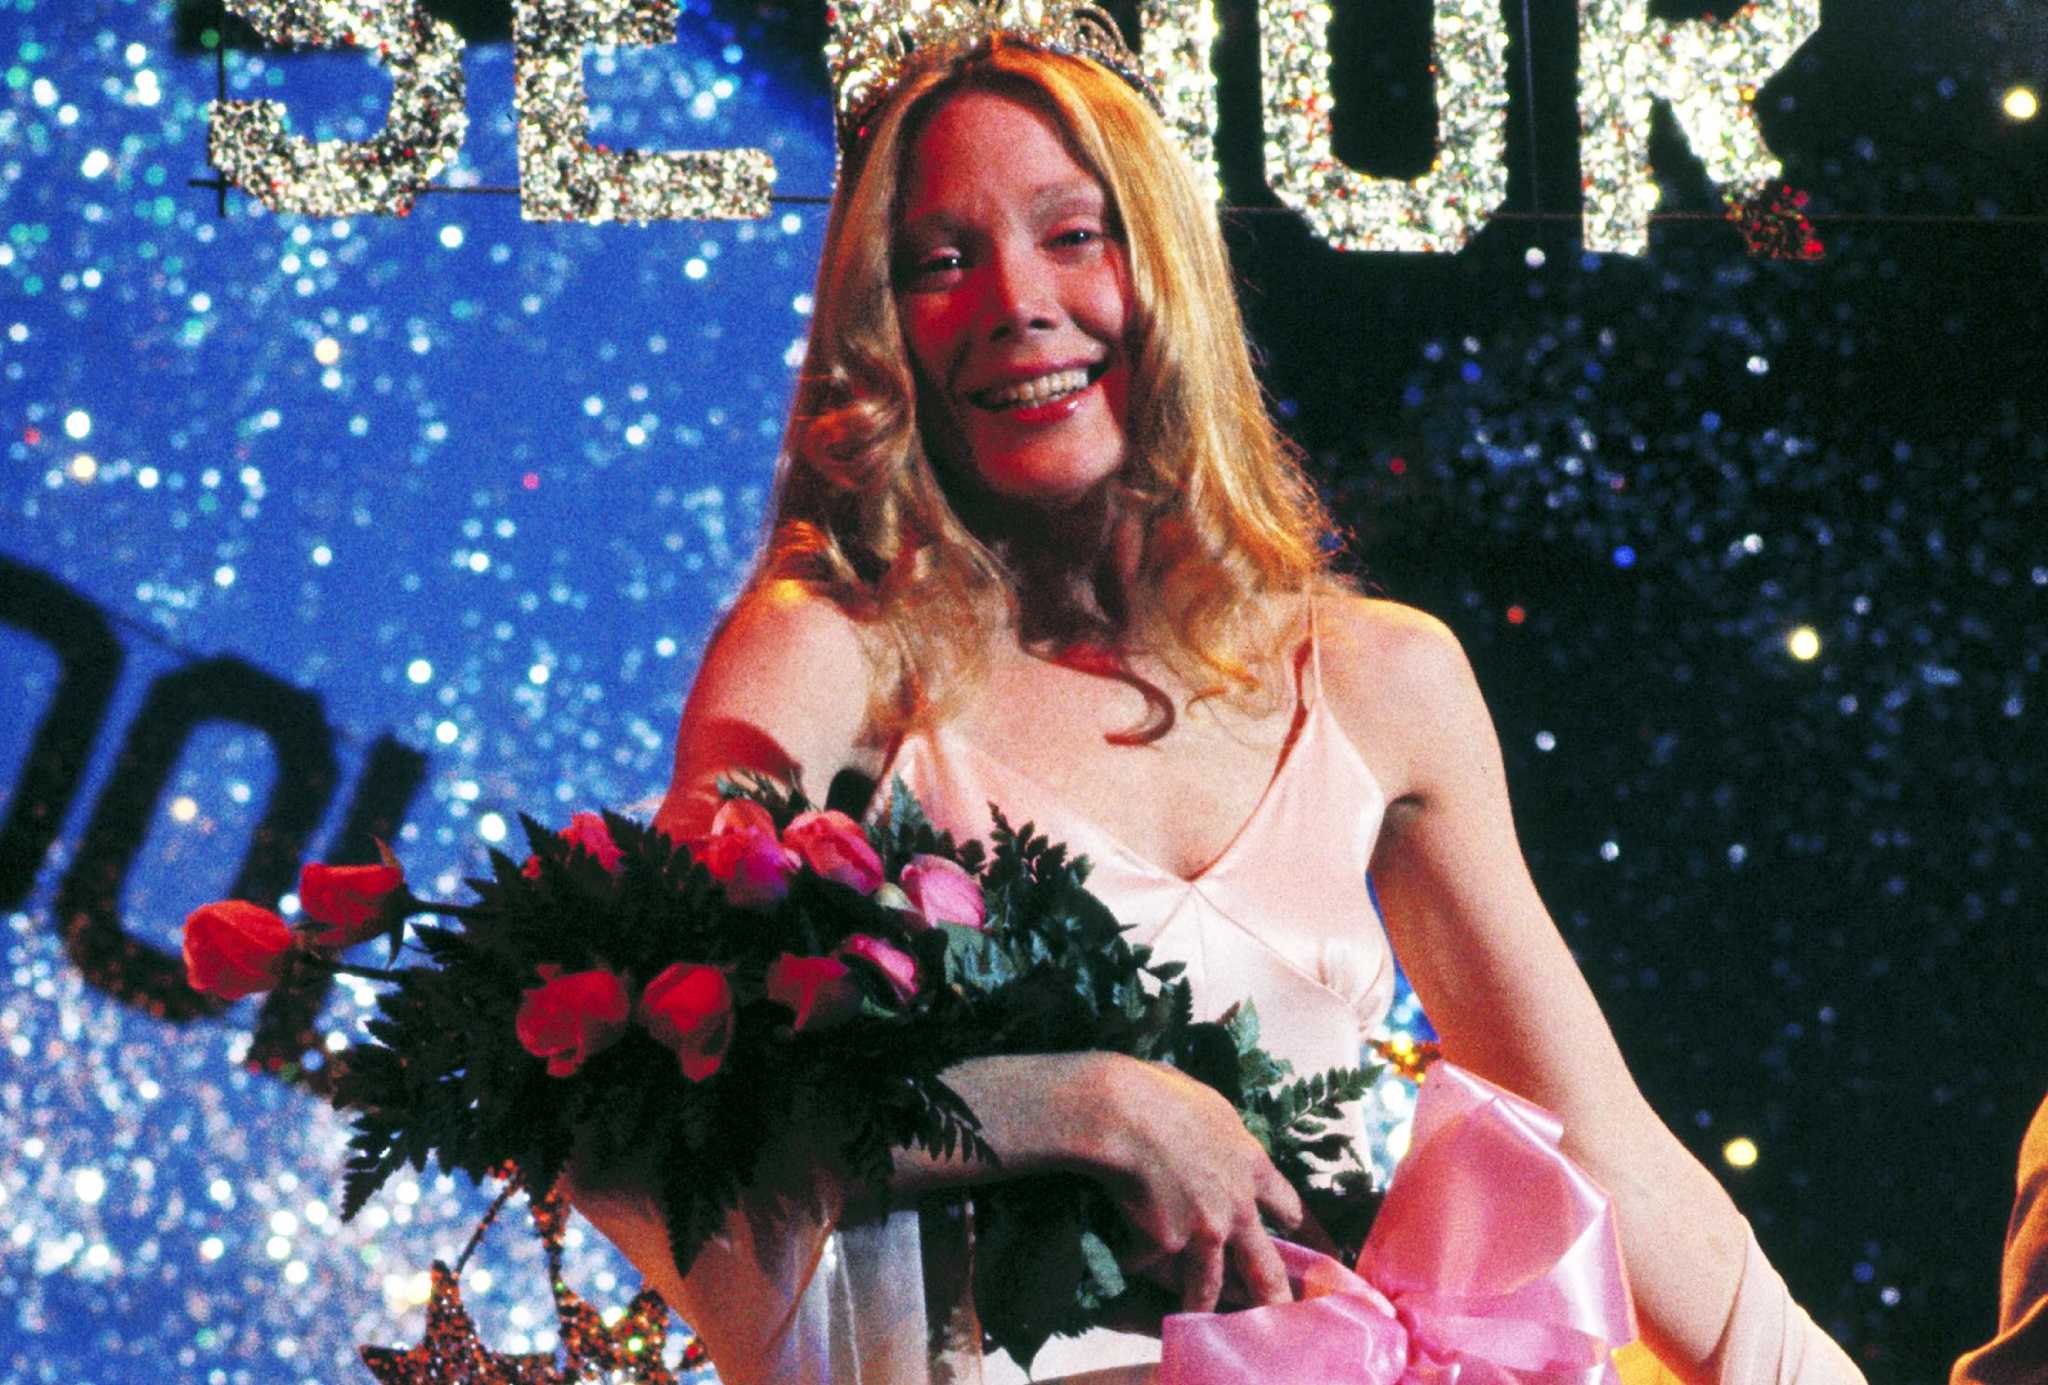 ‘carrie Still Scary After 40 Years